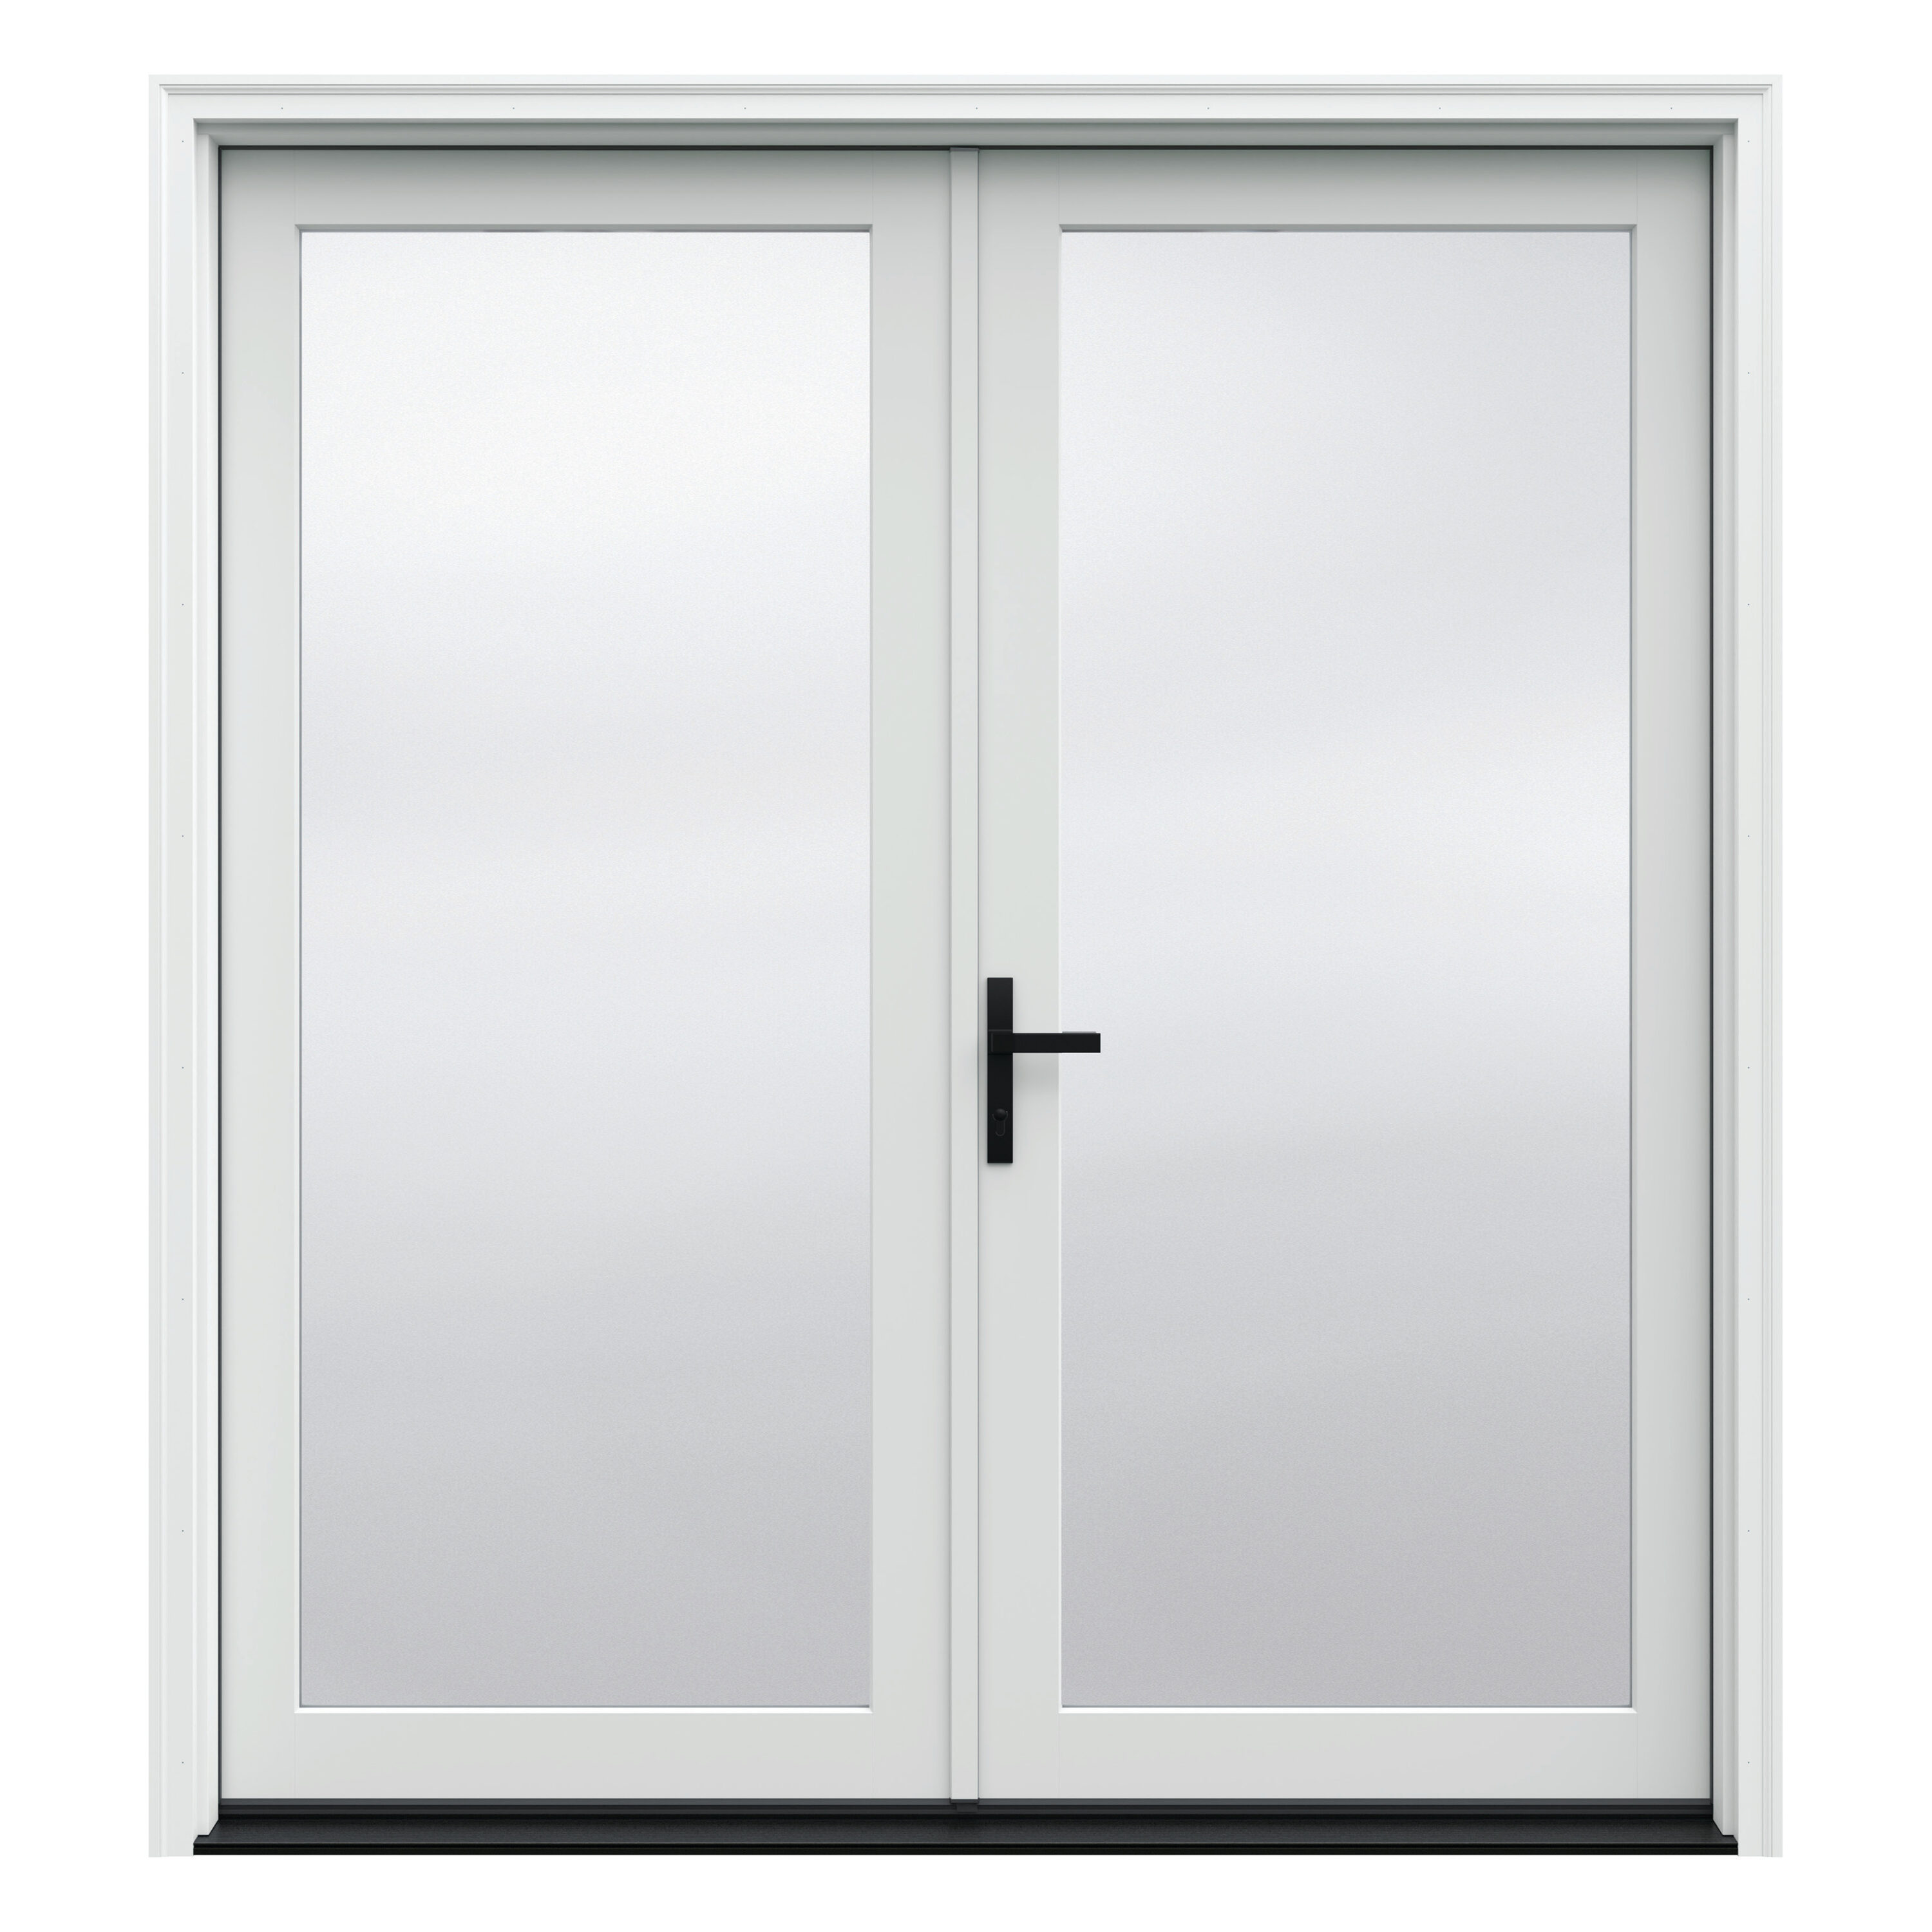 F-4500 72-in x 80-in Low-e Primed Fiberglass French Right-Hand Inswing Double Patio Door Screen Included in Off-White | - JELD-WEN LOWOLJW252000049